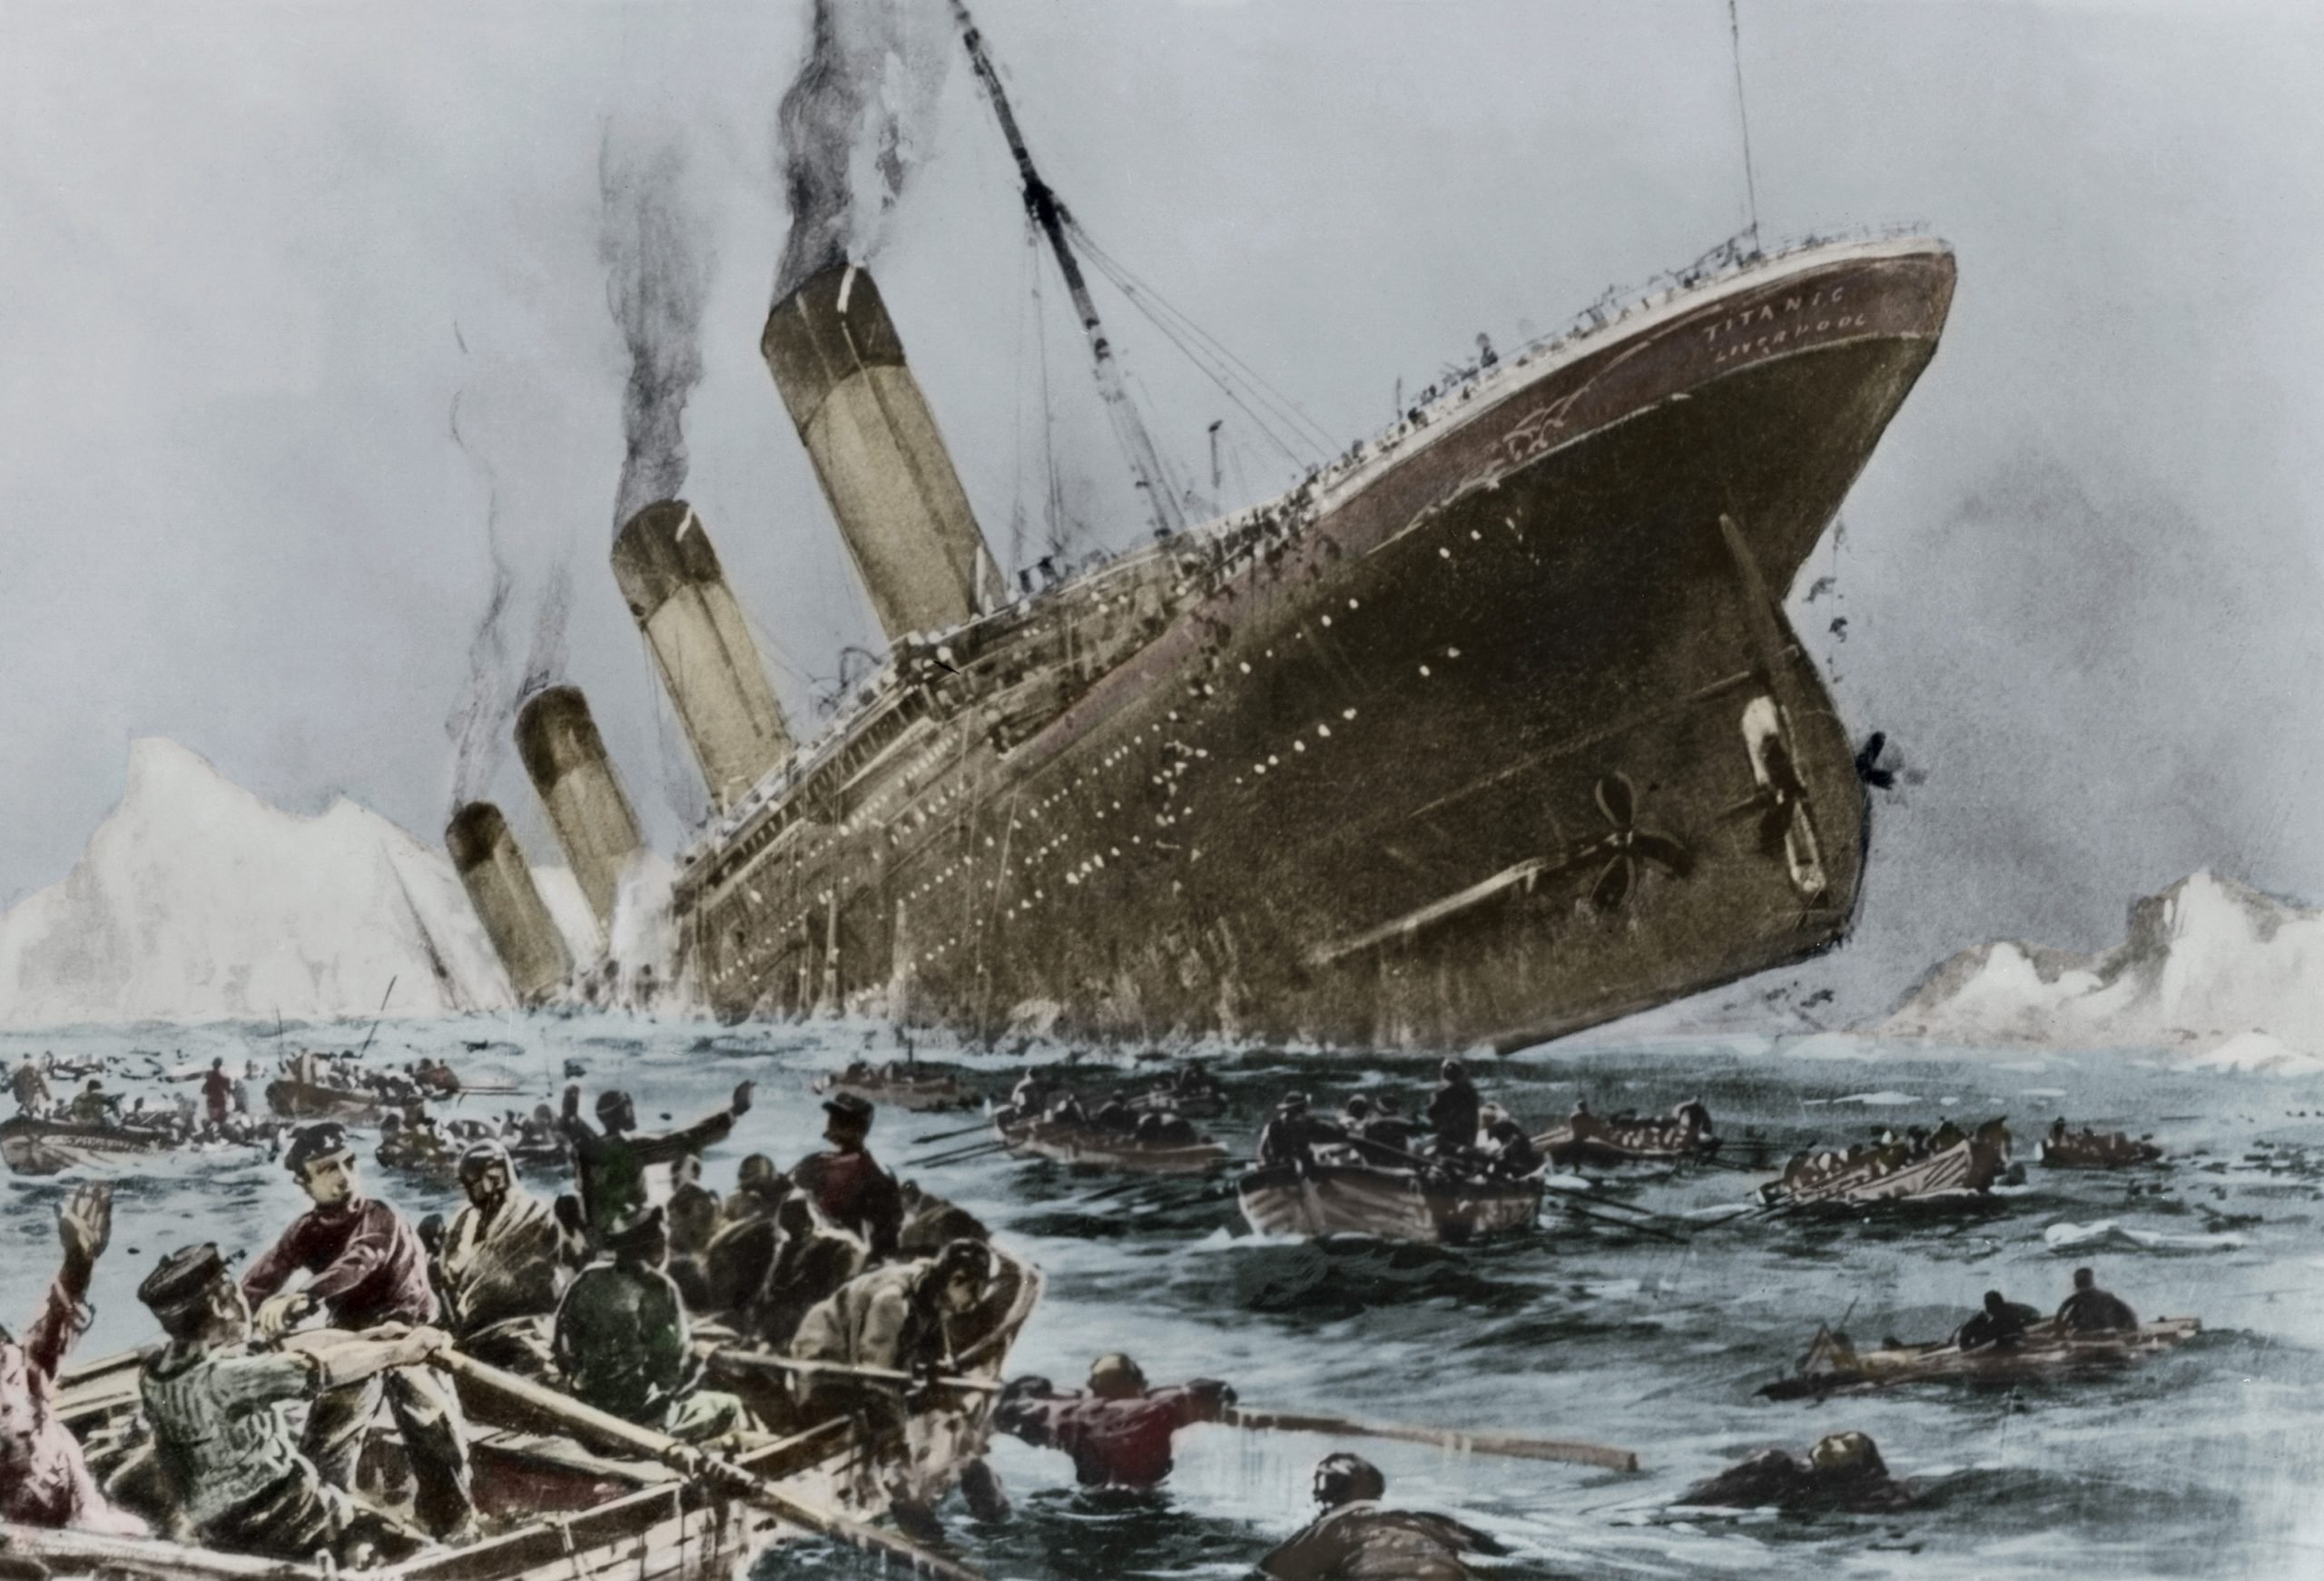 Titanic Never Let Go - RMS Olympic Facts